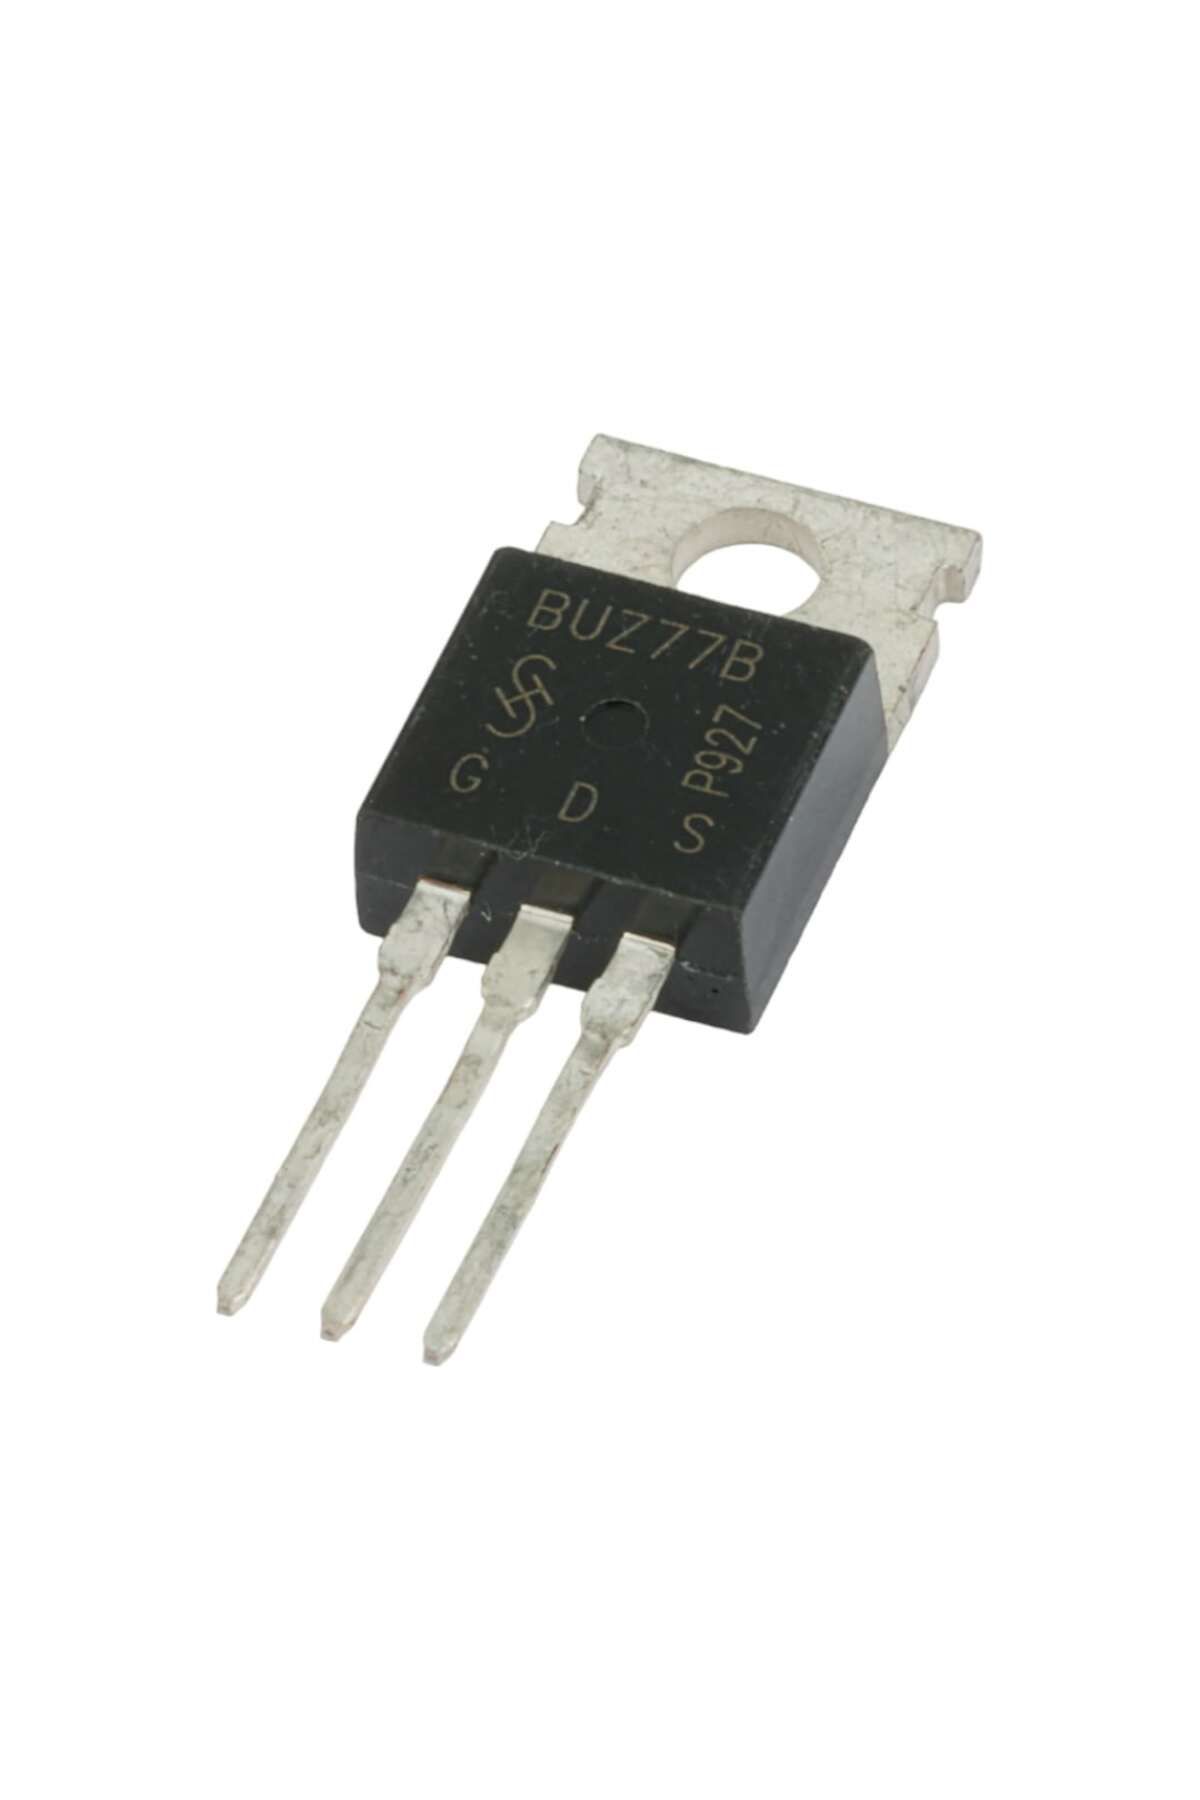 DİMA OFFİCİAL BUZ 77B TO-220 MOSFET TRANSISTOR